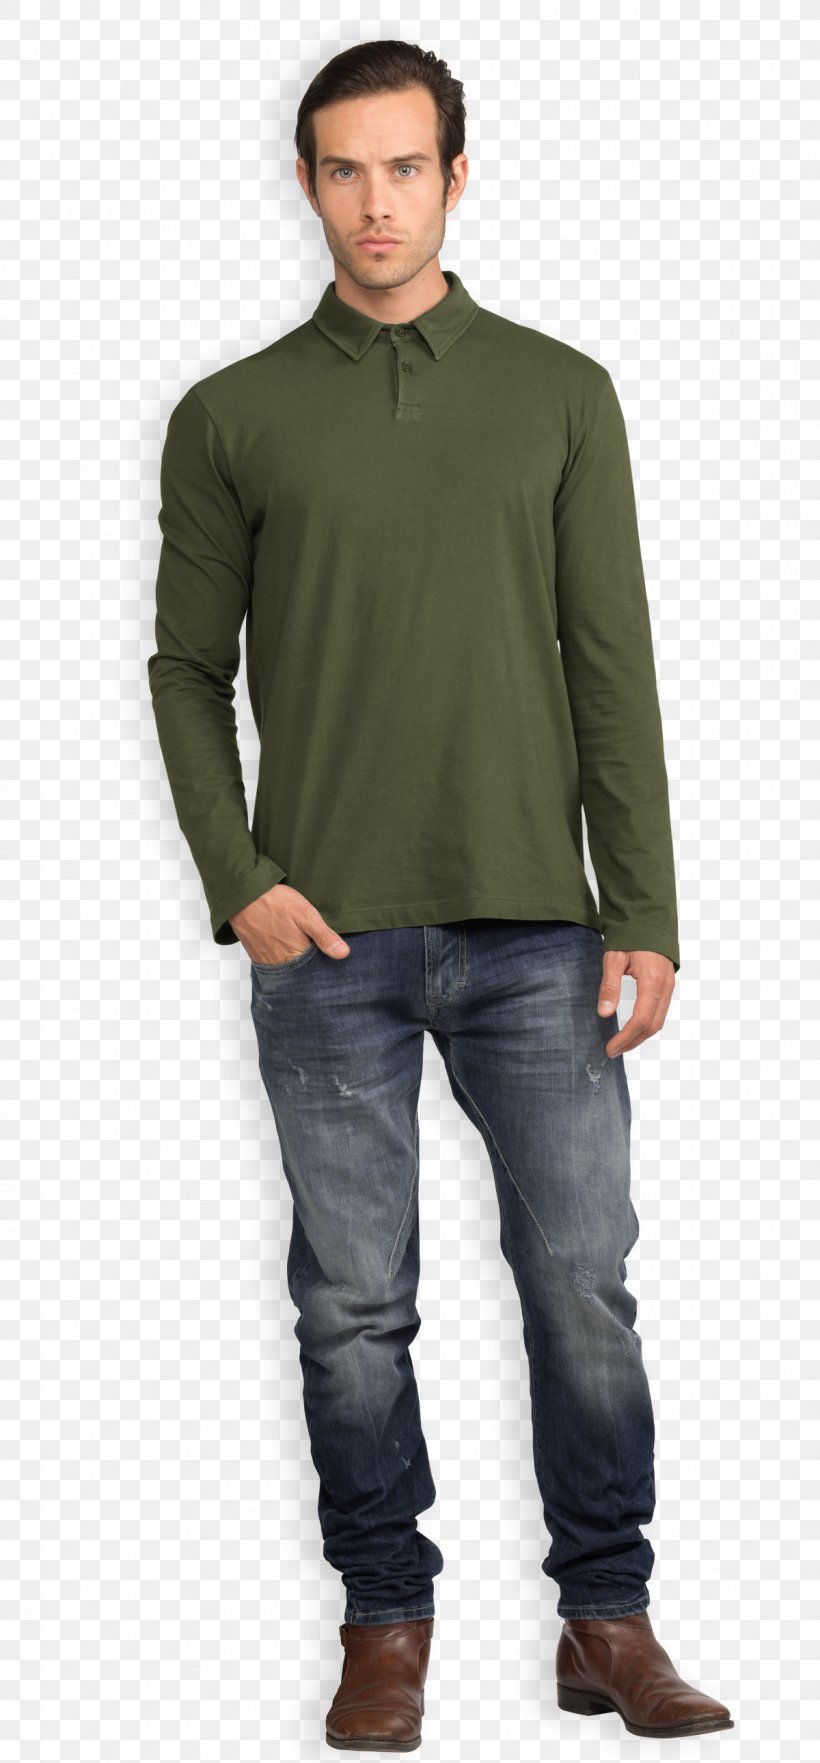 T-shirt Polo Shirt Jeans Sleeve, PNG, 1200x2580px, Tshirt, Button, Clothing, Jacket, Jeans Download Free